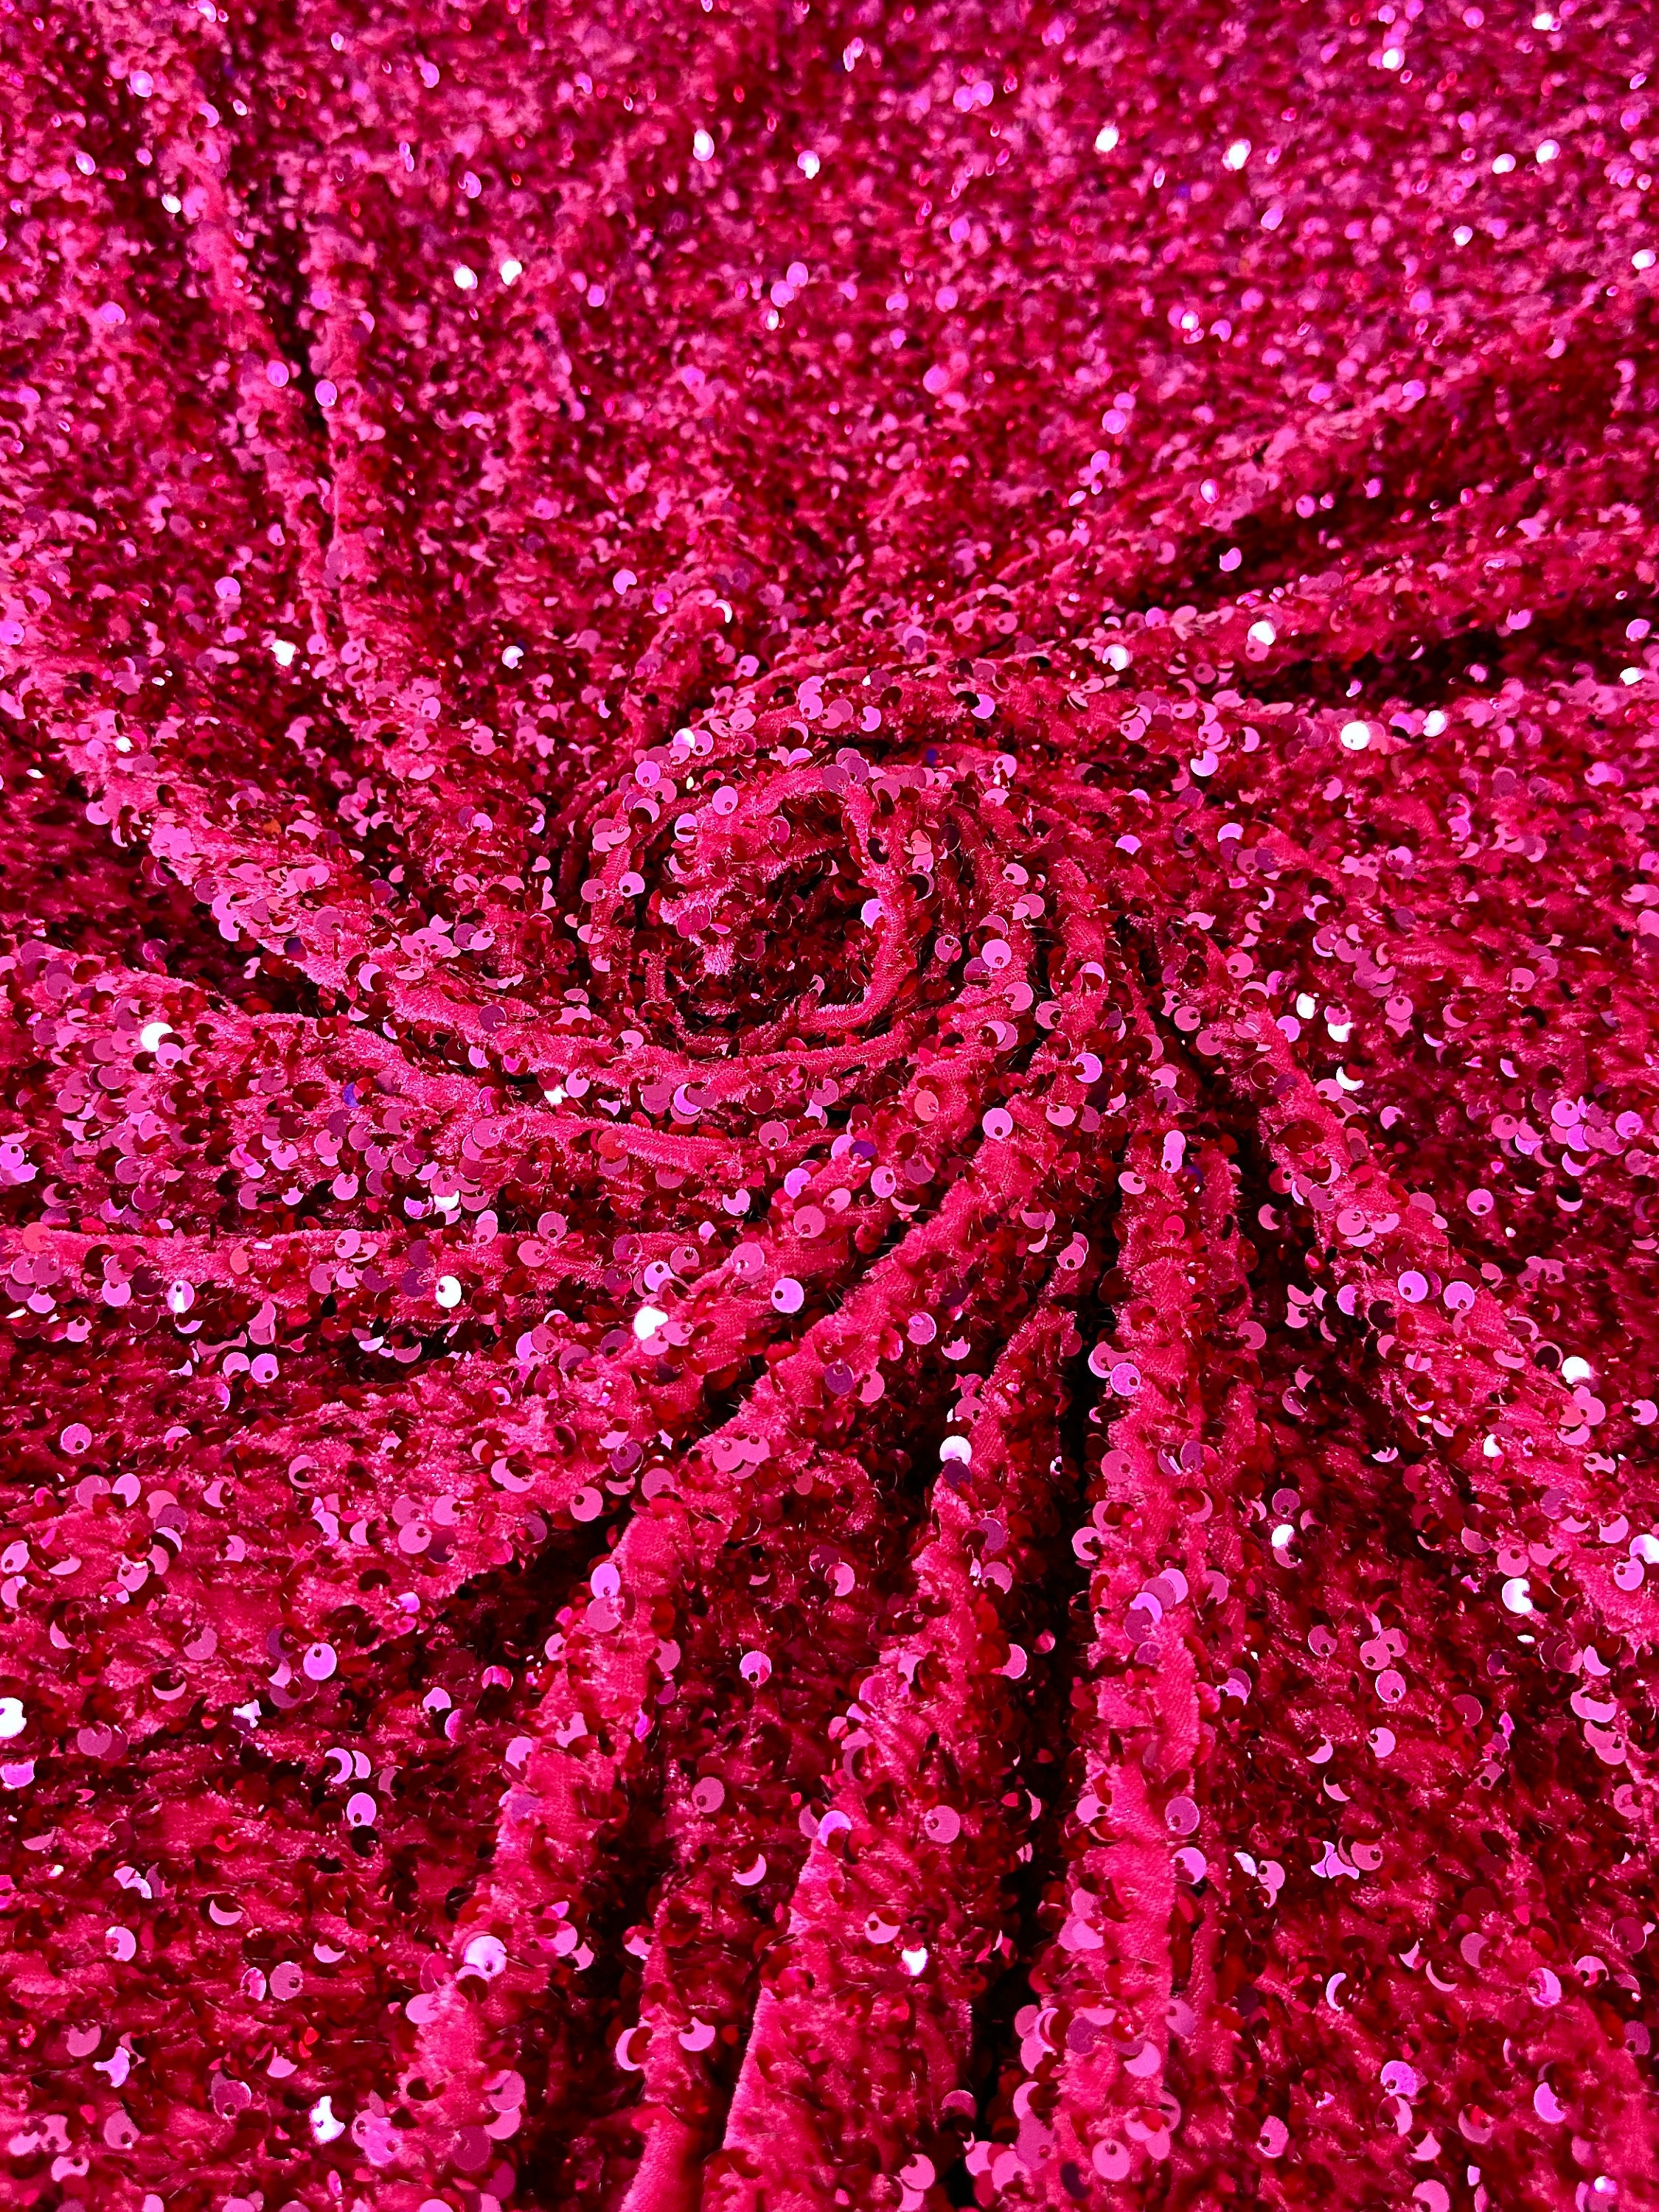 FUHSY Hot Pink Sequin Fabric by The Yard 2 Yards Stretch Velvet